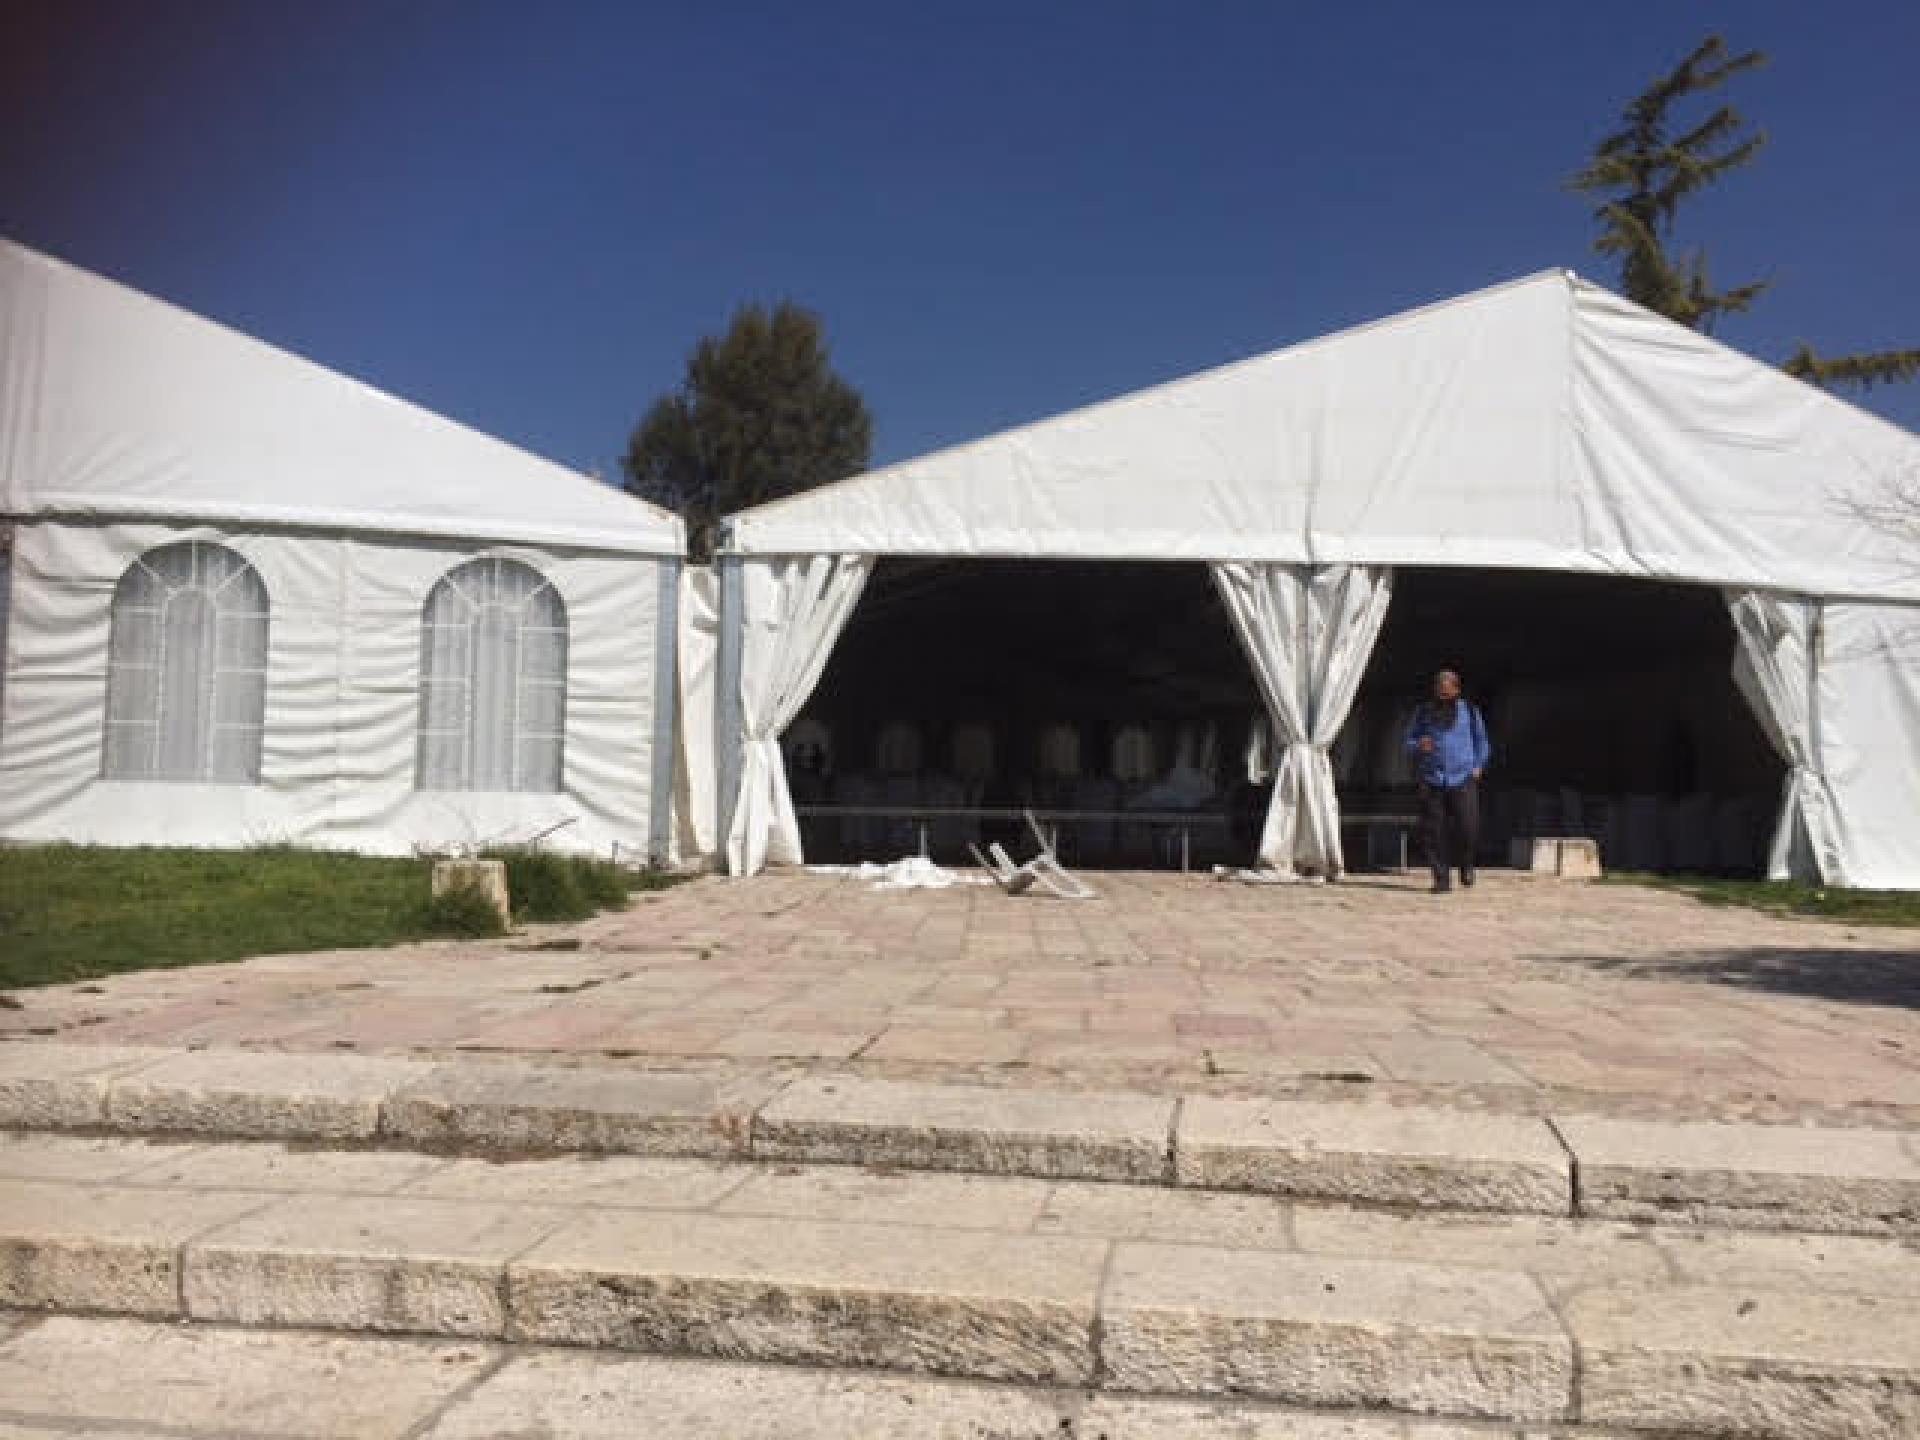 Chabad Hasidim took over the lawn near the Cave of the Patriarchs, having dinner in the evening